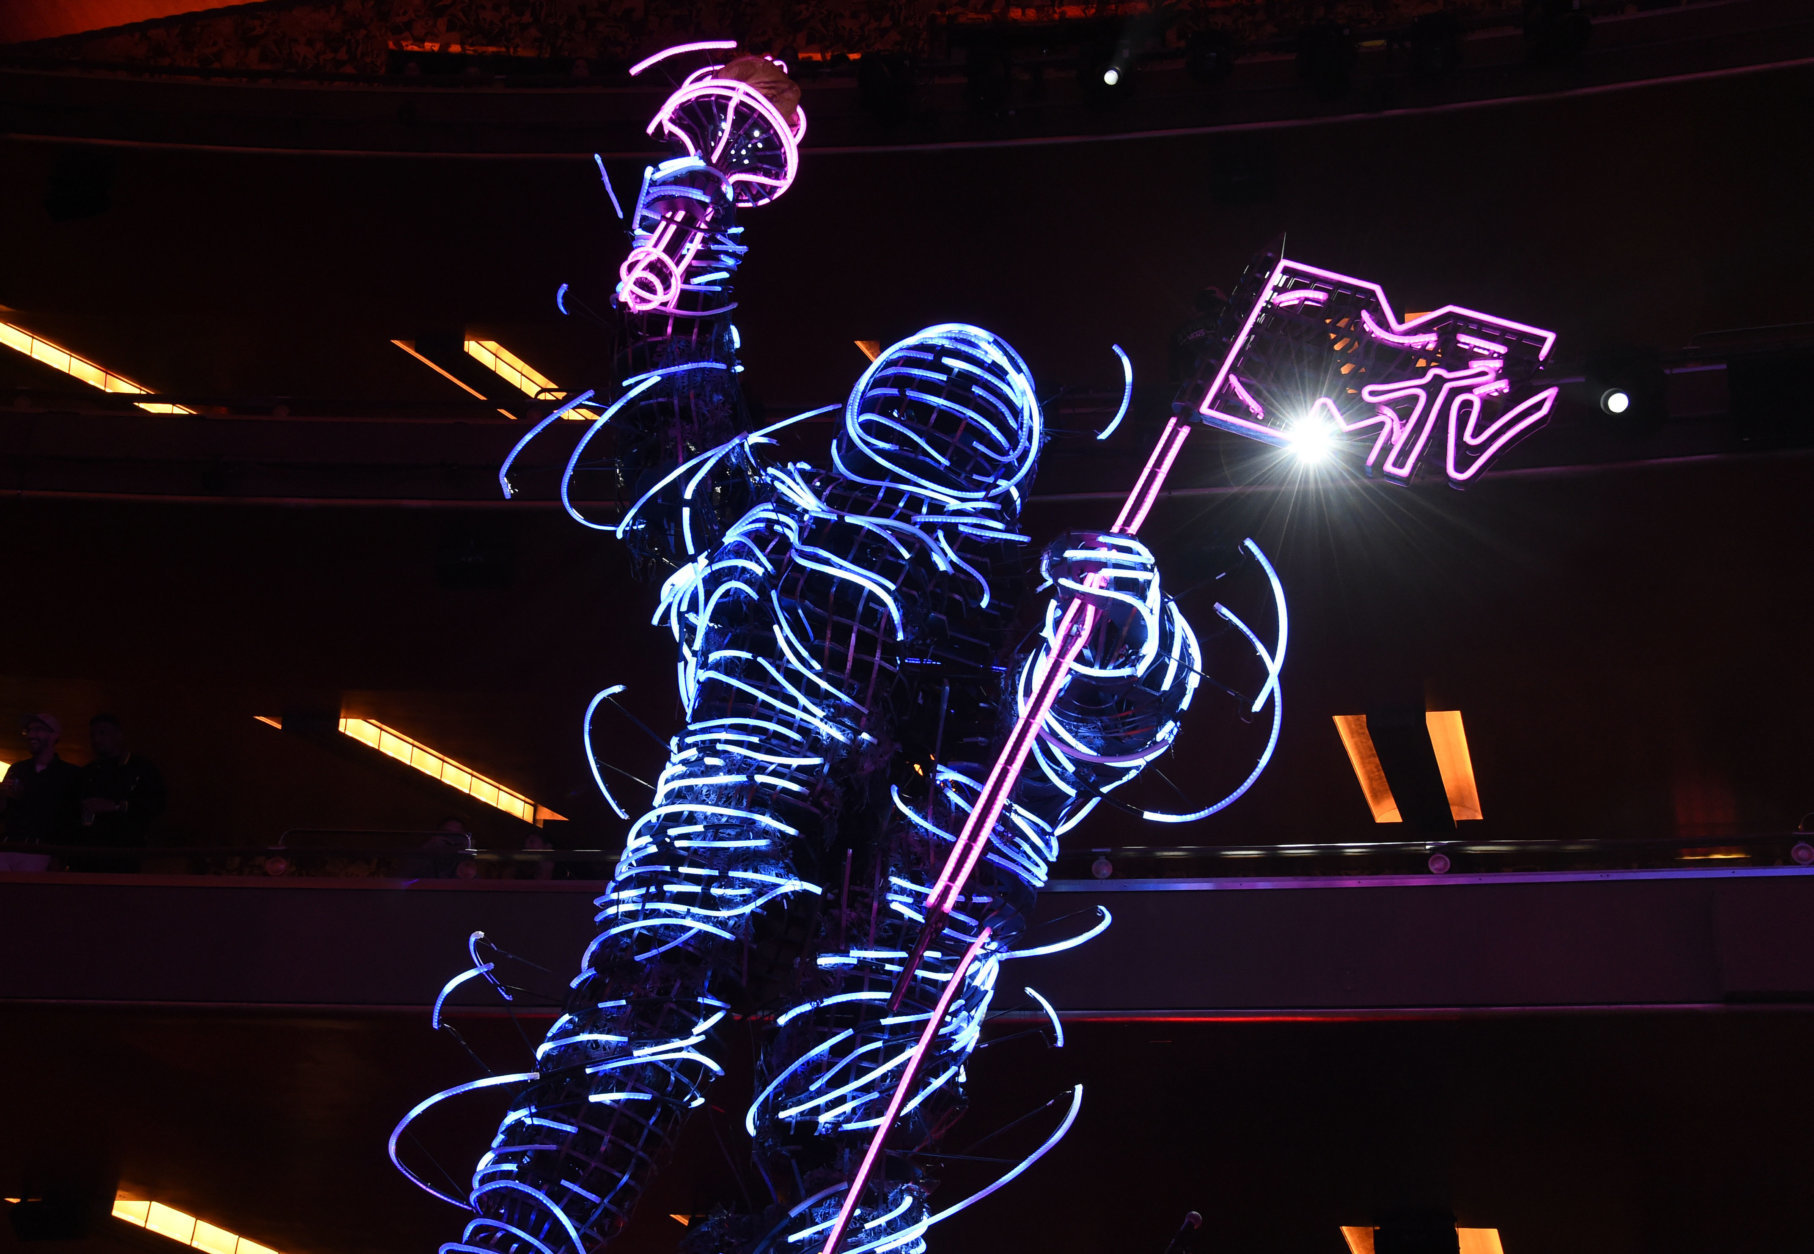 A view of a neon Moon Man appears at the MTV Video Music Awards at Radio City Music Hall on Monday, Aug. 20, 2018, in New York. (Photo by Chris Pizzello/Invision/AP)